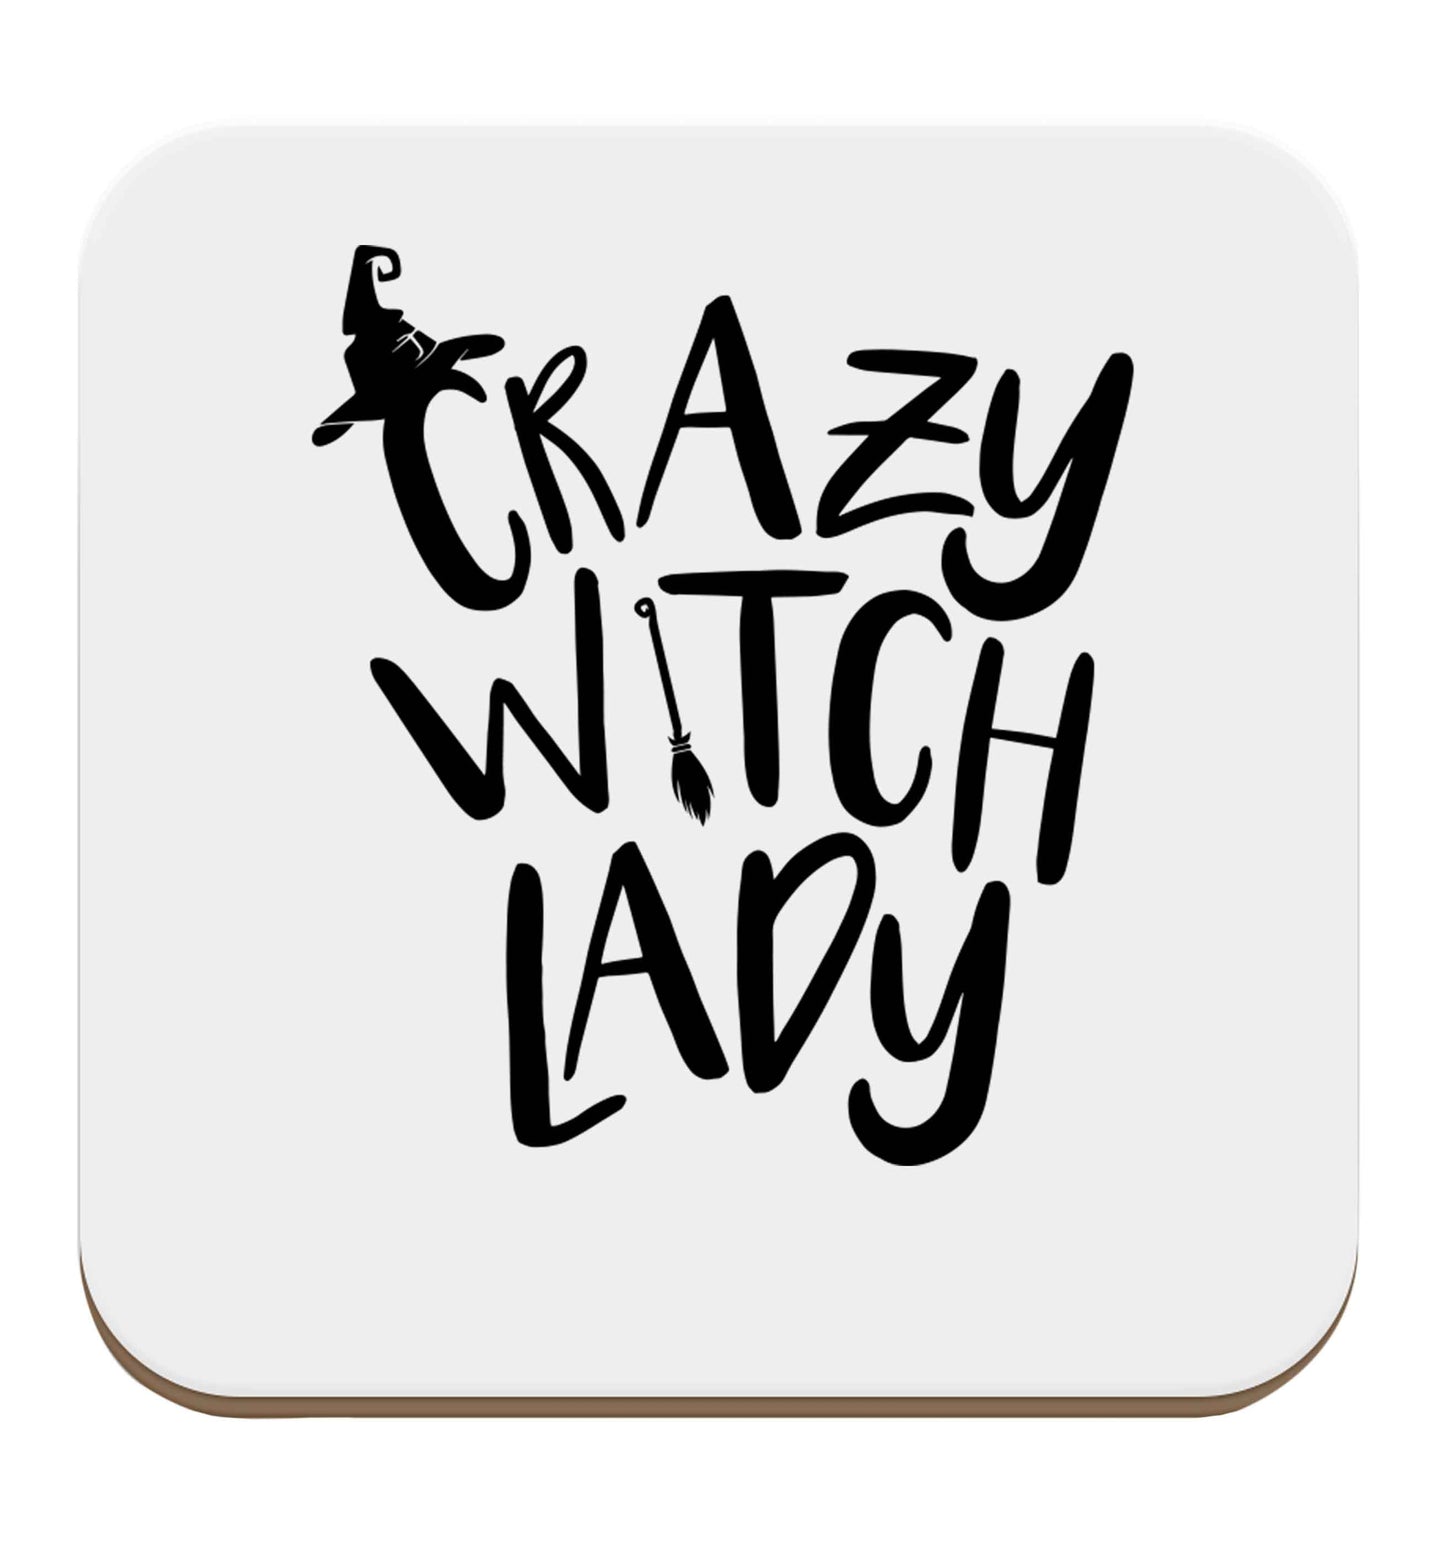 Crazy witch lady set of four coasters